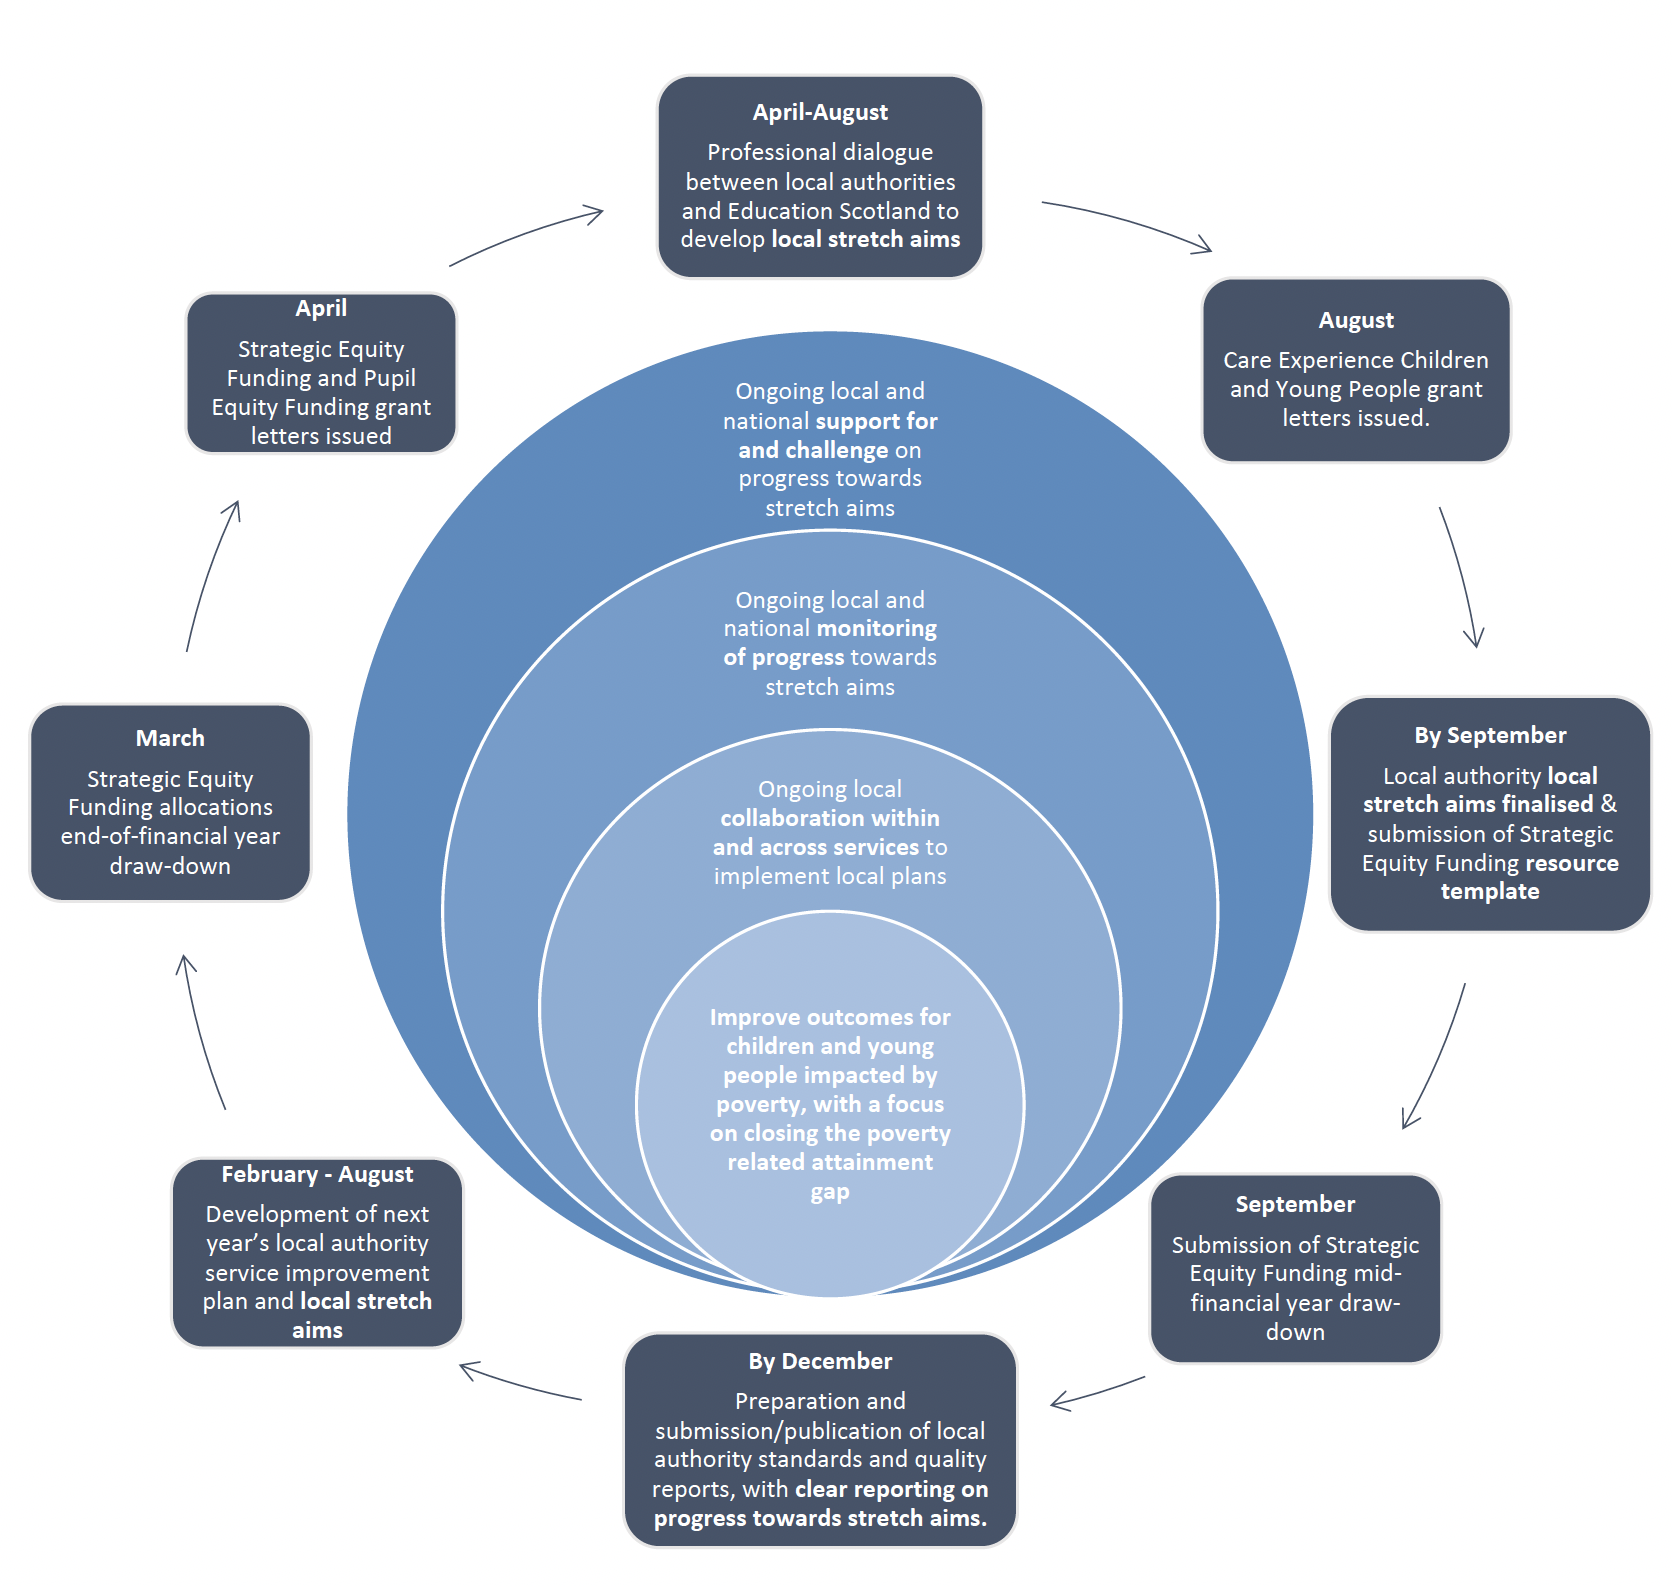 displays the planning and reporting cycle for the scottish attainment challenge.
there are four nested circles starting with
Improve outcomes for children and young people impacted by poverty, with a focus on closing the poverty related attainment gap; ongoing local collaboration within and across services to implement local plans; ongoing local and nation monitoring of progress towards stretch aims and ending at ongoing local national support for and challenge on progress towards stretch aims
surrounding this is a timeline of continuous events. At the top of the circle, moving right it says:
April - August - professional dialogue between local authorities and education scotland to develop local stretch aims
August - Care Experienced Children and Young People grant letters issued
by September - local authority local stretch aims finalised & submission of resource template
October - submission of Strategic Equity Funding mid-financial year draw-down
By December - preparation and submission / publication of local authority standards and quality reports, with clear reporting on progress towards stretch aims
February - August - Development of next year's local authority service improvement plan and local stretch aims
March - Strategic Equity Funding allocations end-of-financial year draw-down
April - Strategic Equity Funding and Pupil Equity Funding grant letters issued